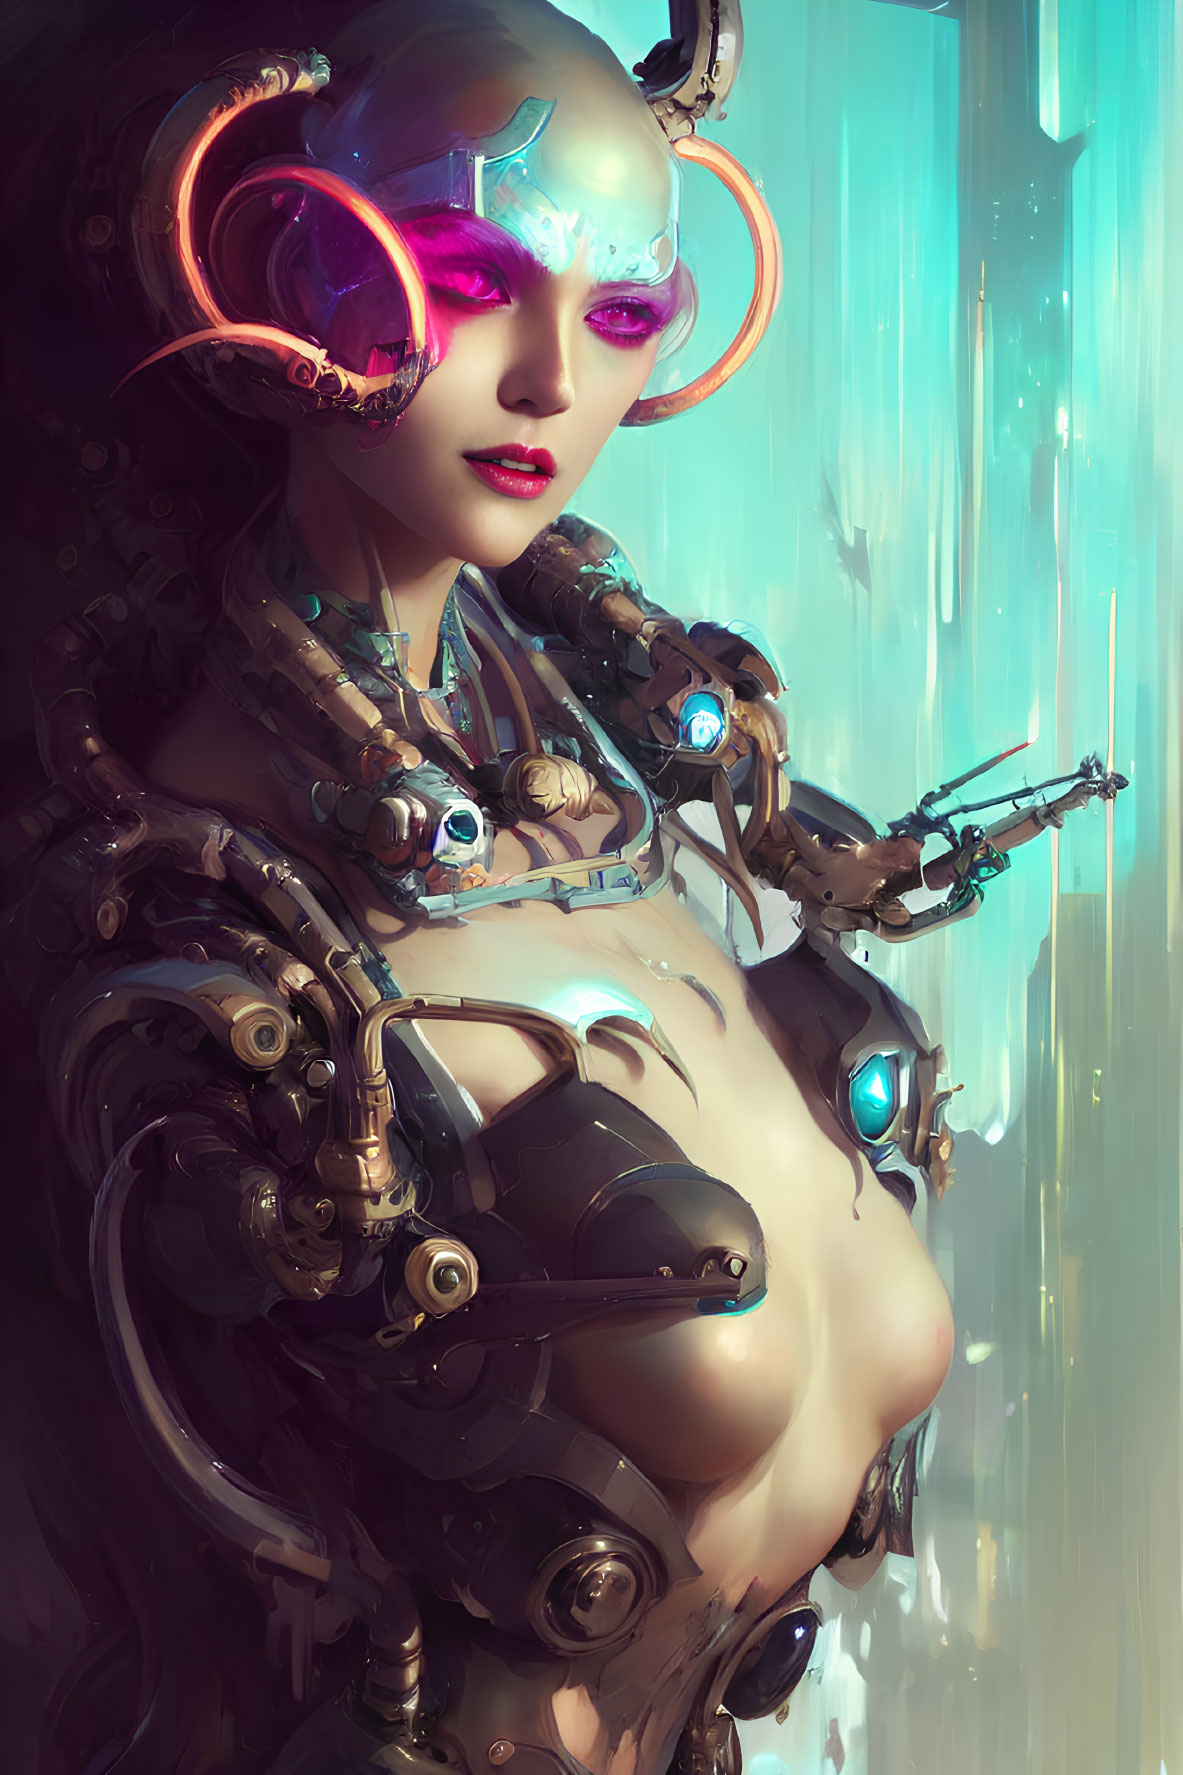 Female android with exposed mechanical parts and glowing blue eyes in digital backdrop